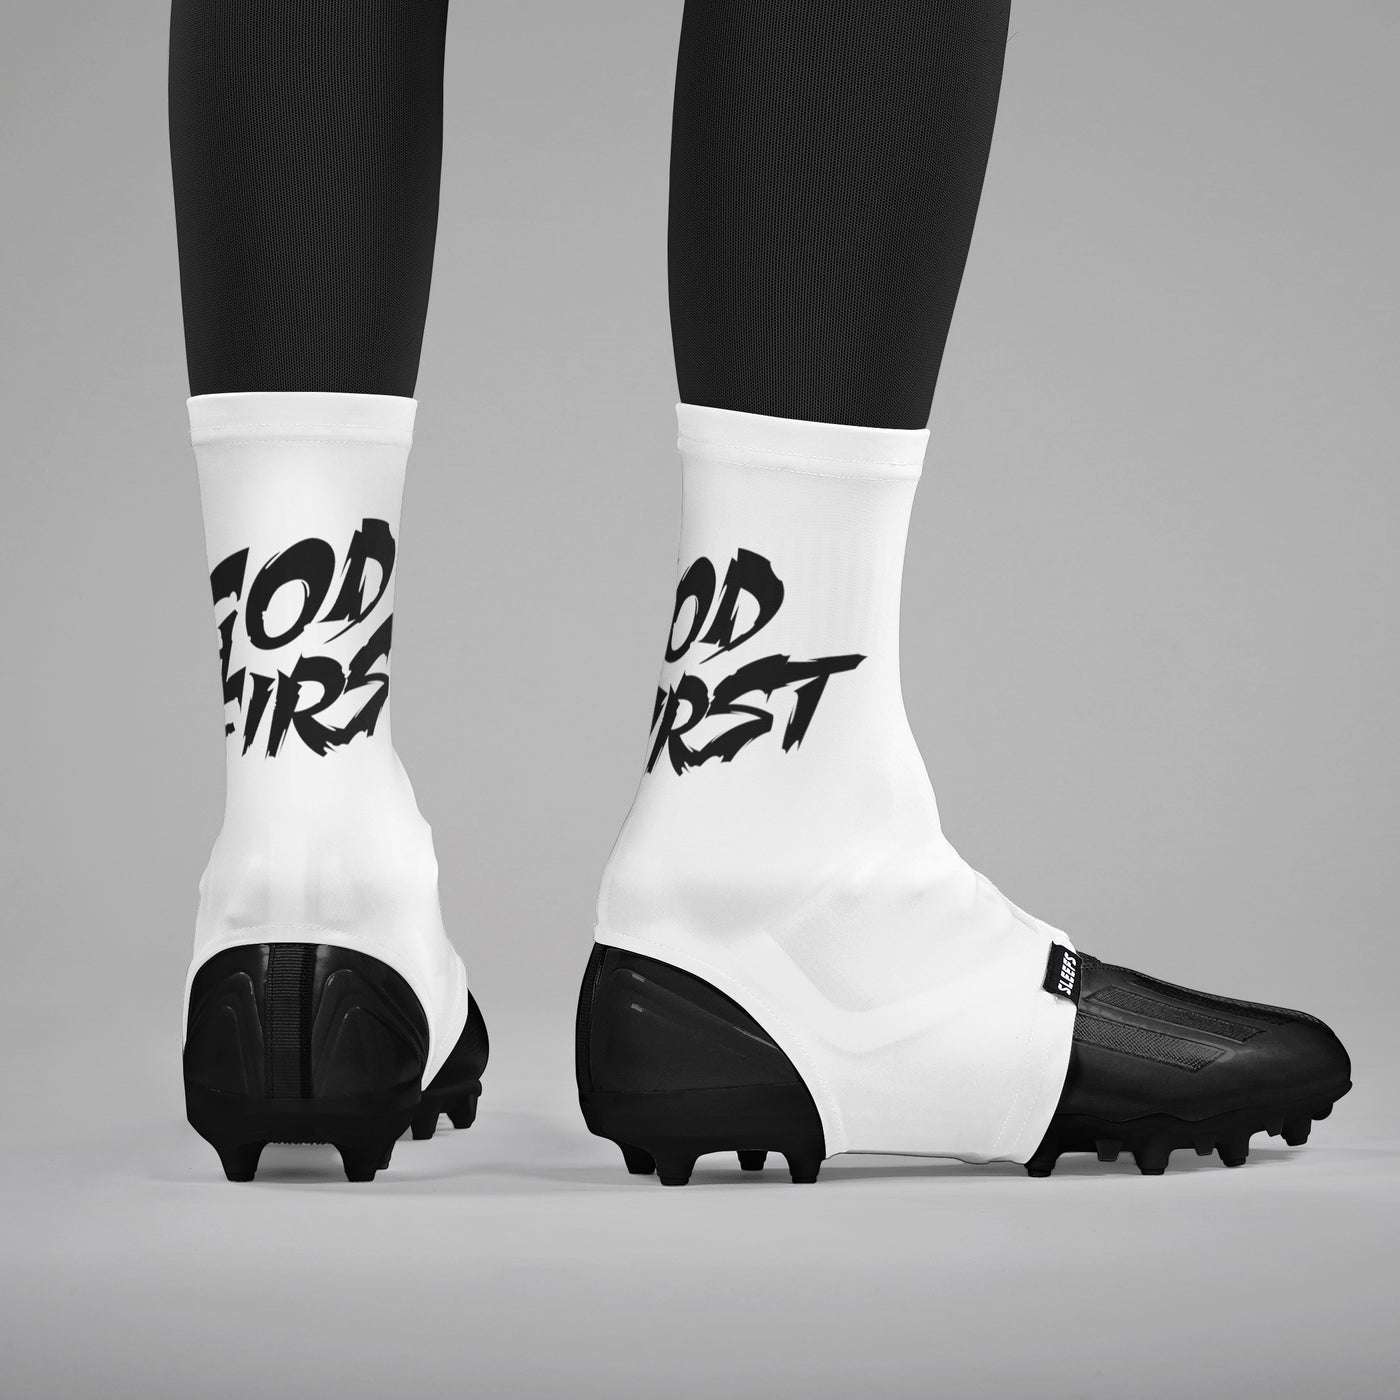 God First White Spats / Cleat Covers